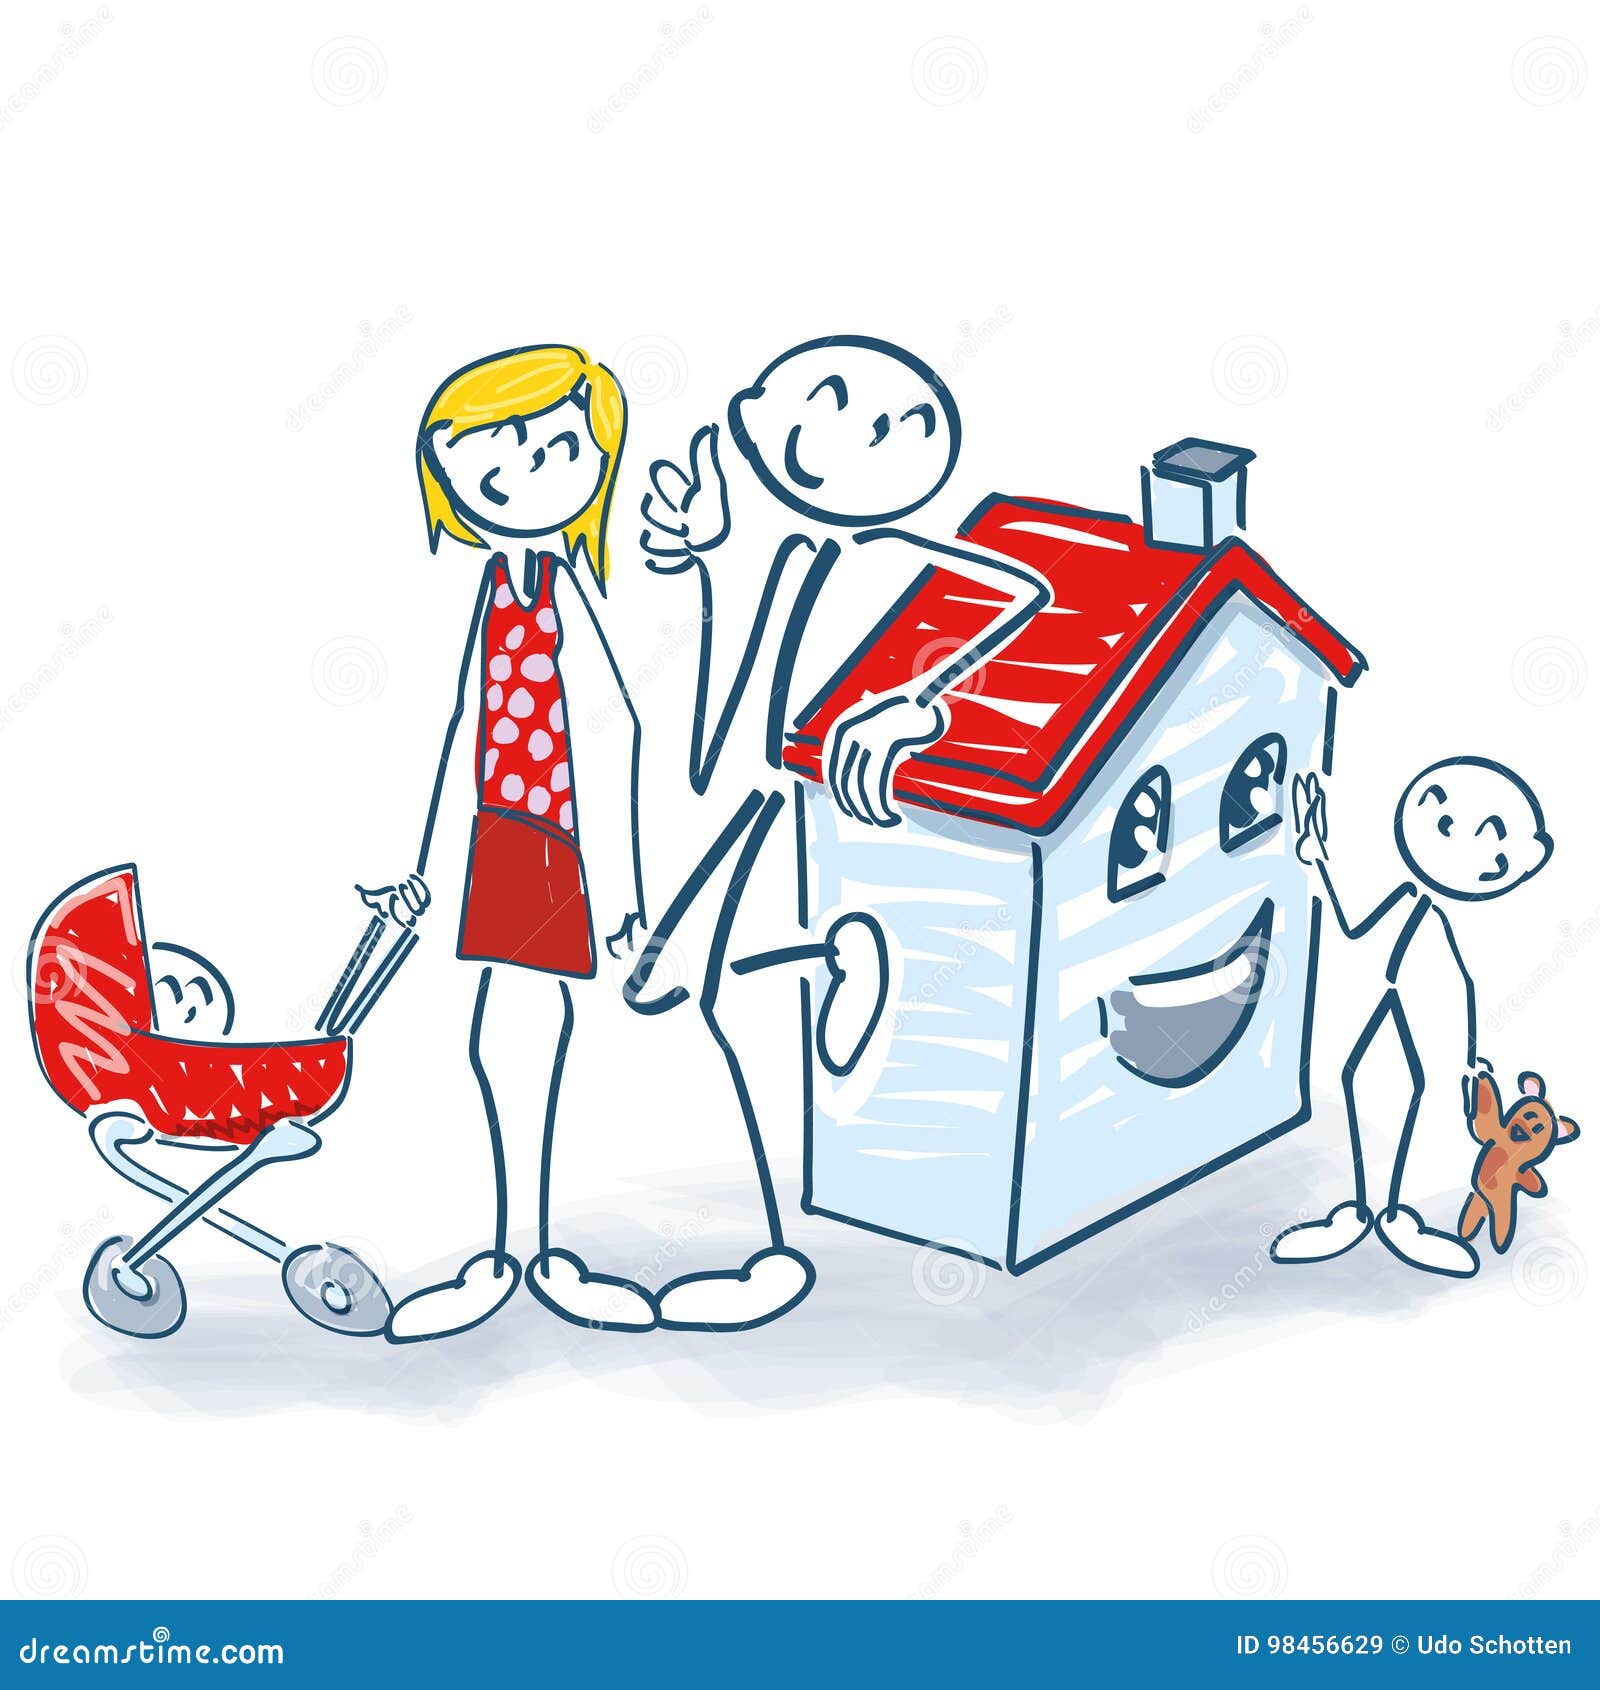 stick figures with house and home for small family